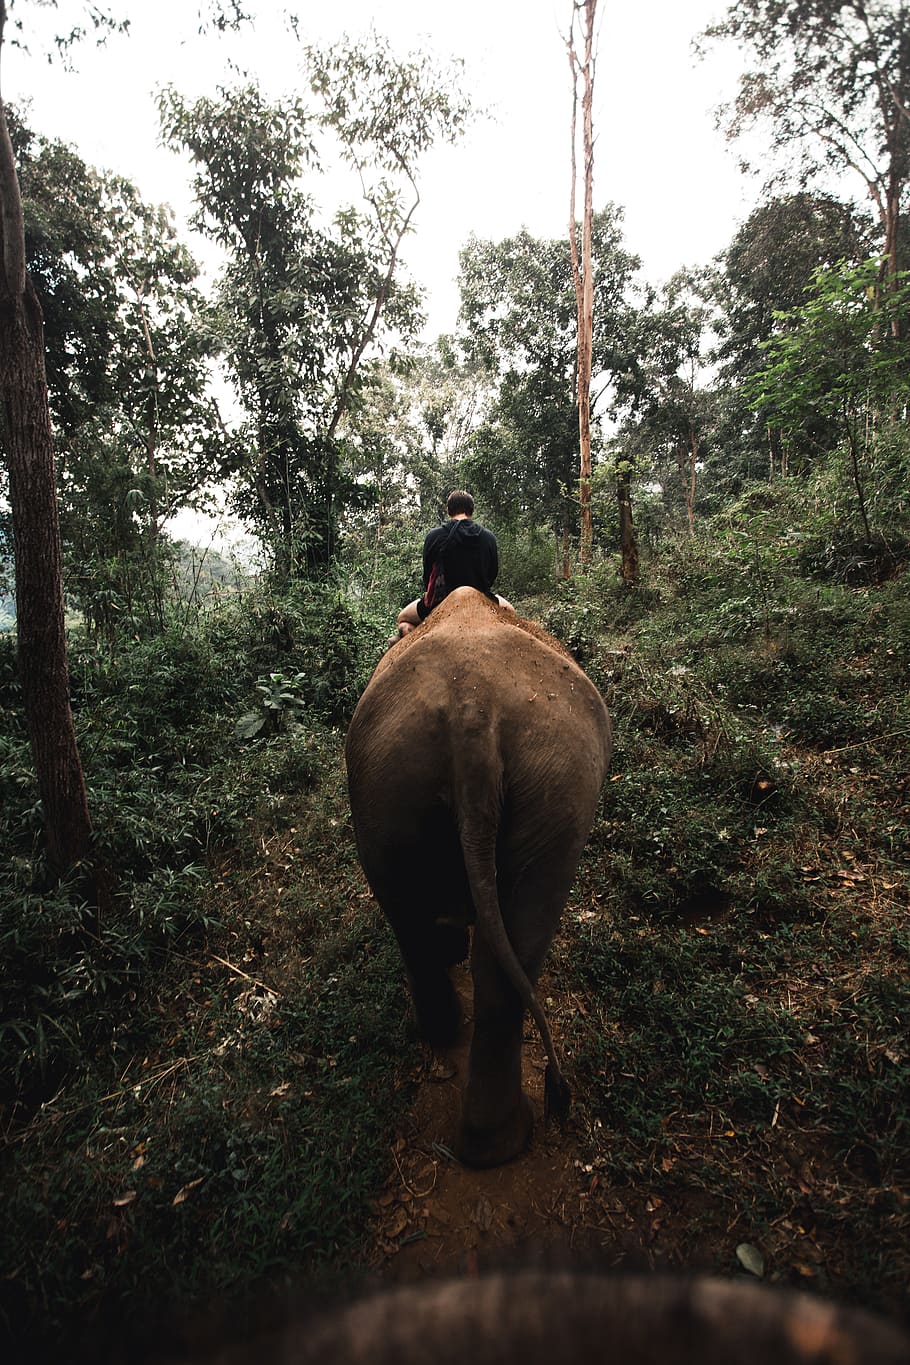 person riding elephant in woods during daytime, mammal, wildlife